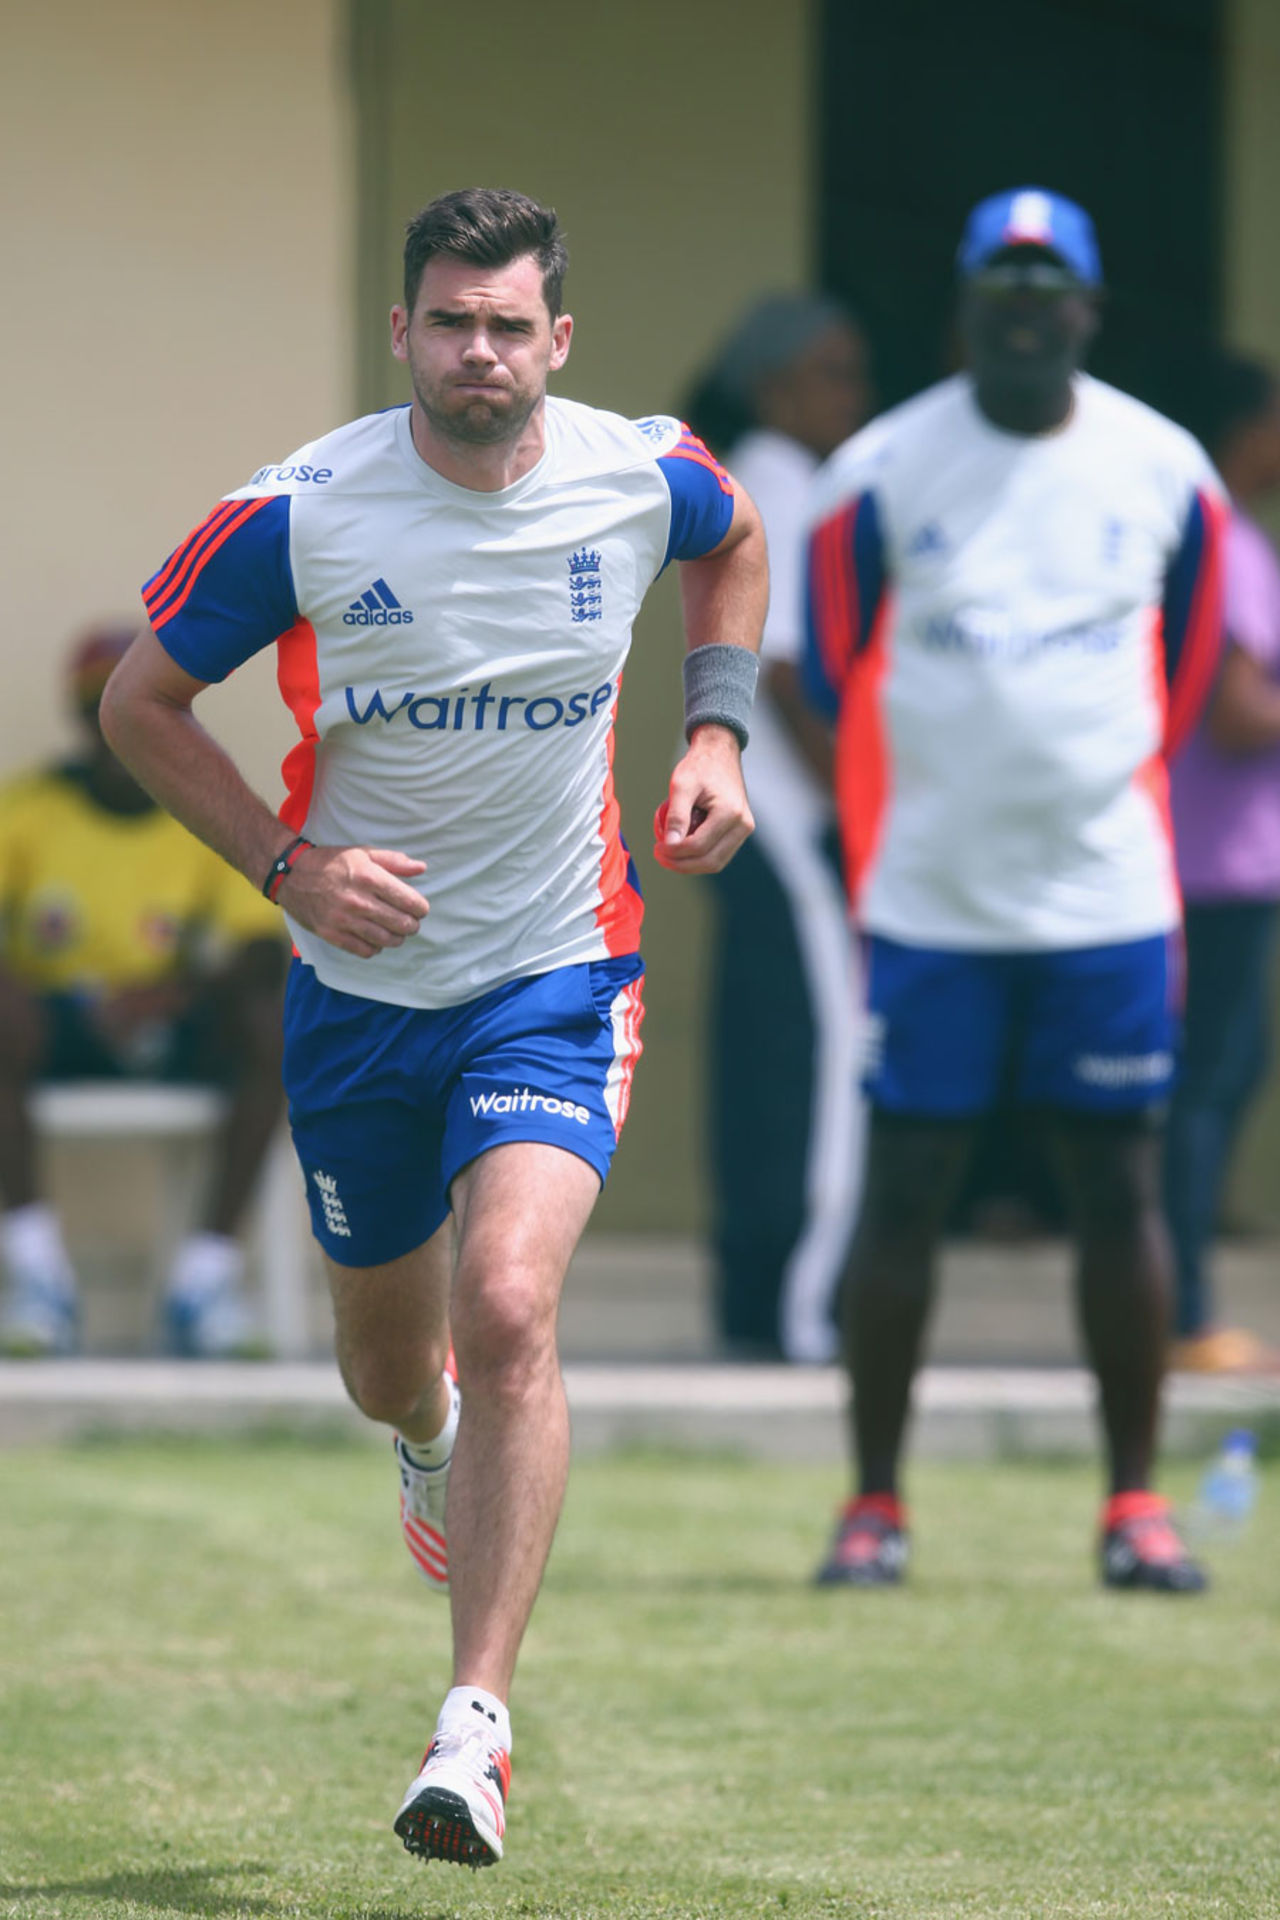 James Anderson in training ahead of his 100th Test, Antigua, April 11, 2015